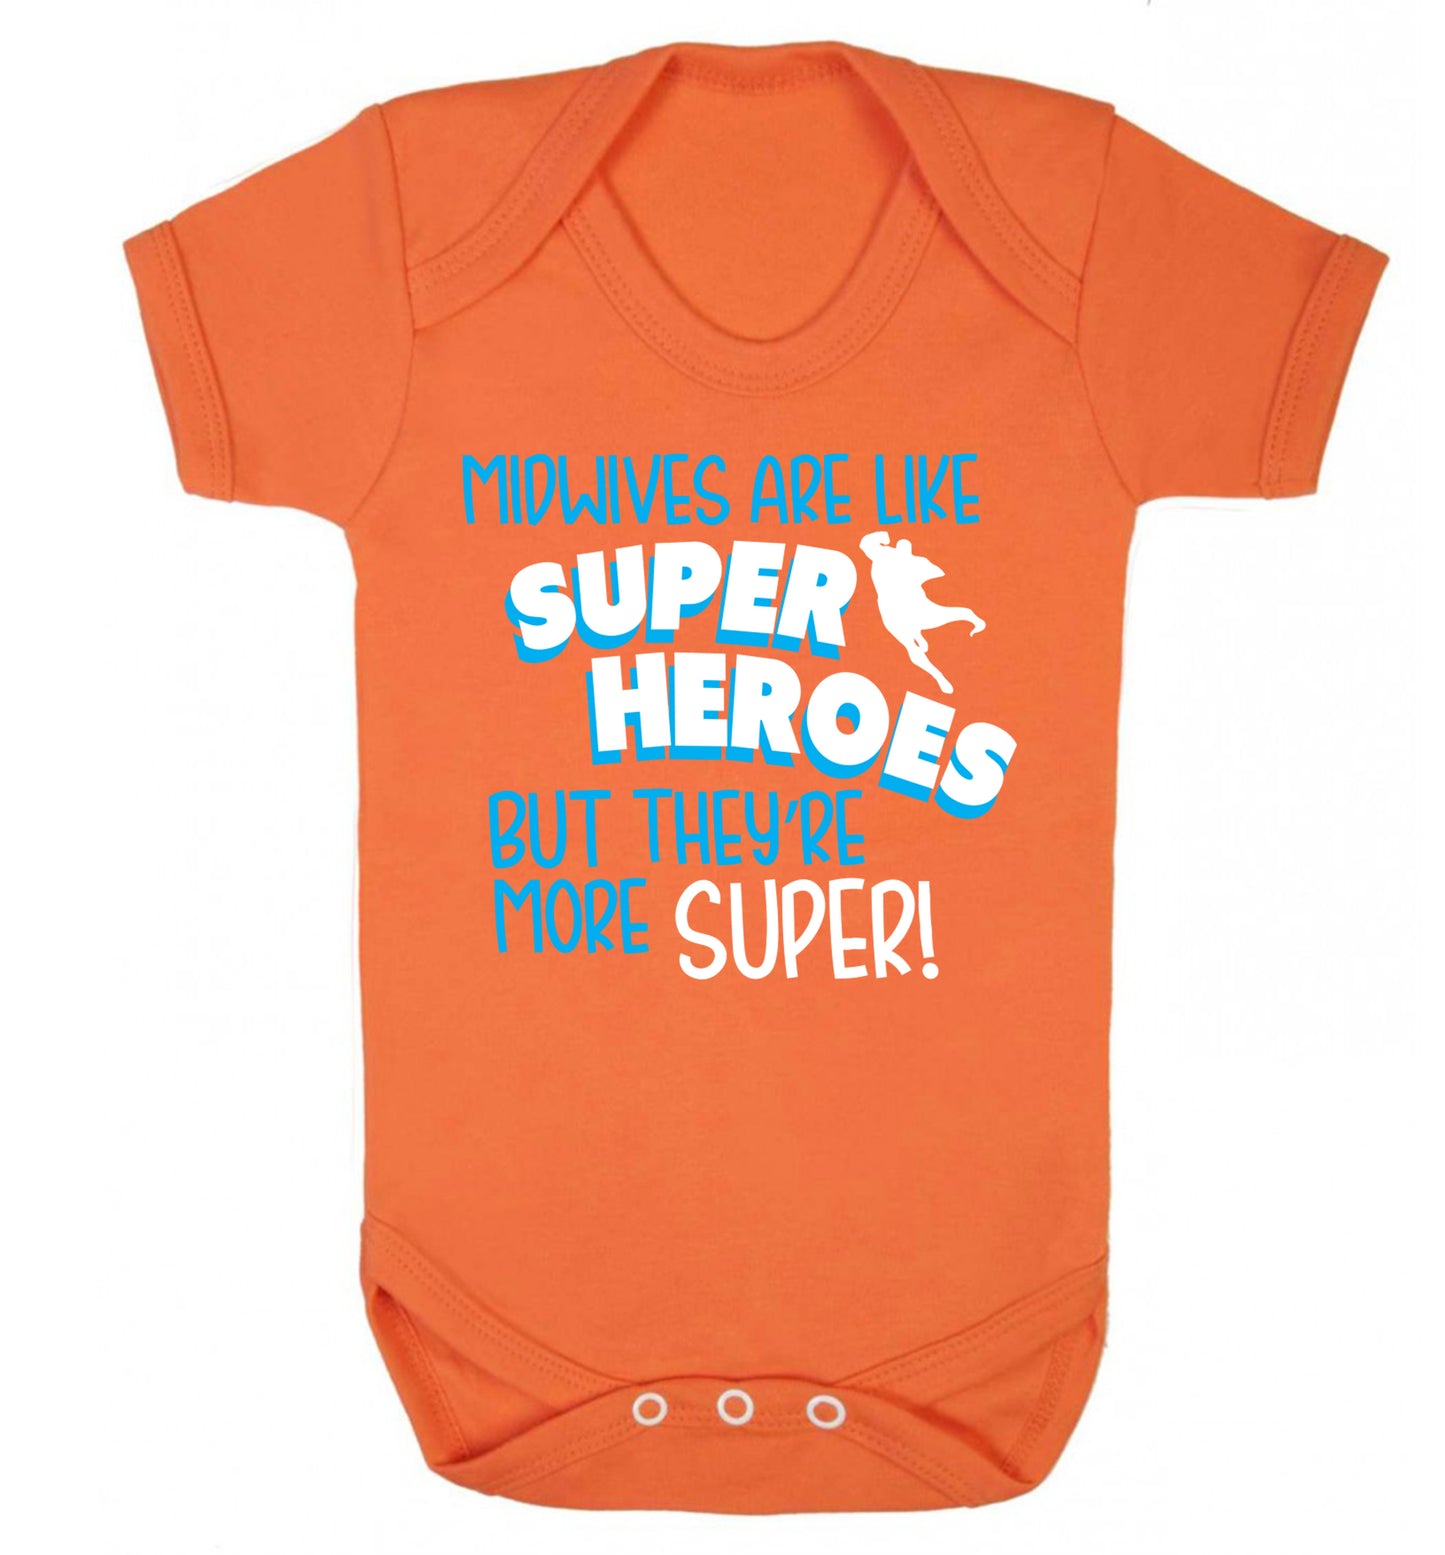 Midwives are like superheros but they're more super Baby Vest orange 18-24 months